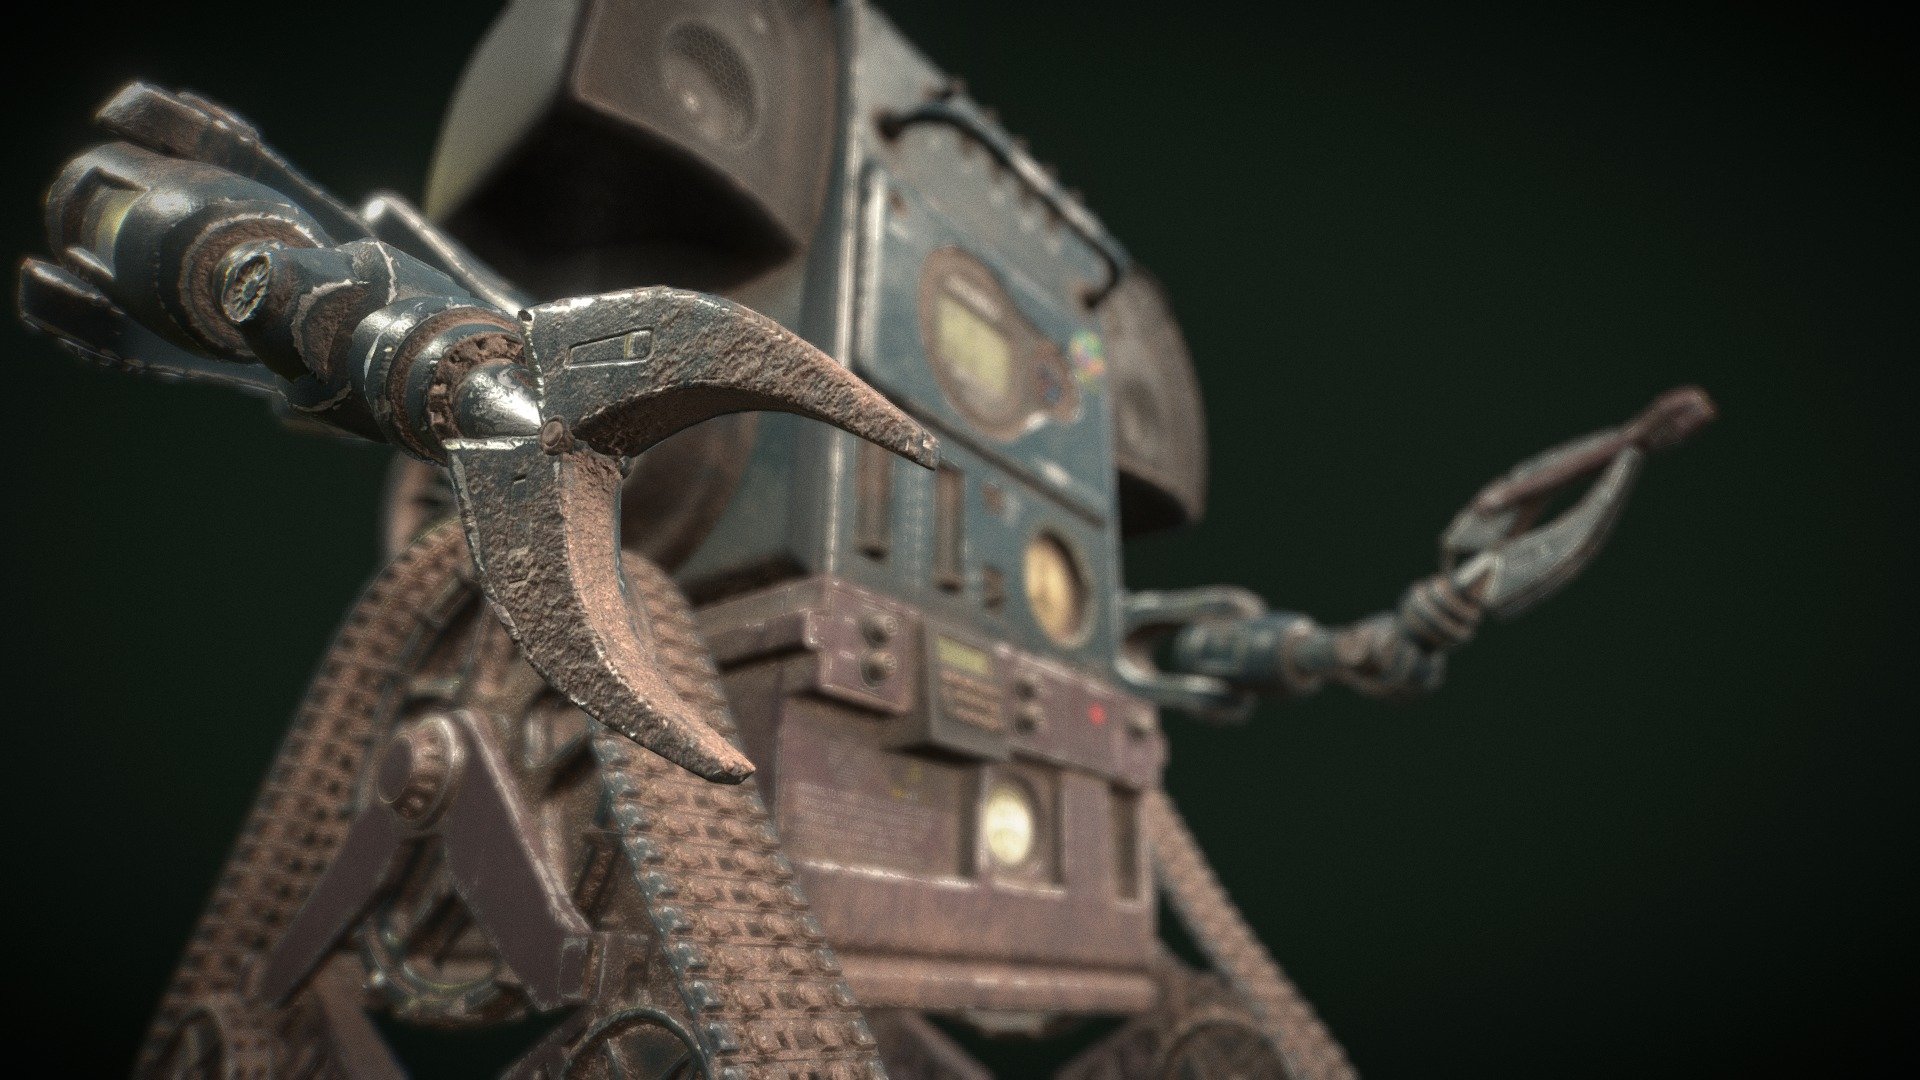 I made this model for some short movie project and unfortunately it canceled for some reason so i just posted here
modeling with blender and texturing with substance painter,everything done with in 4 days.
let me know your comments down below and check my Artstation page for more   - Mere - 3D model by Abringo 3d model